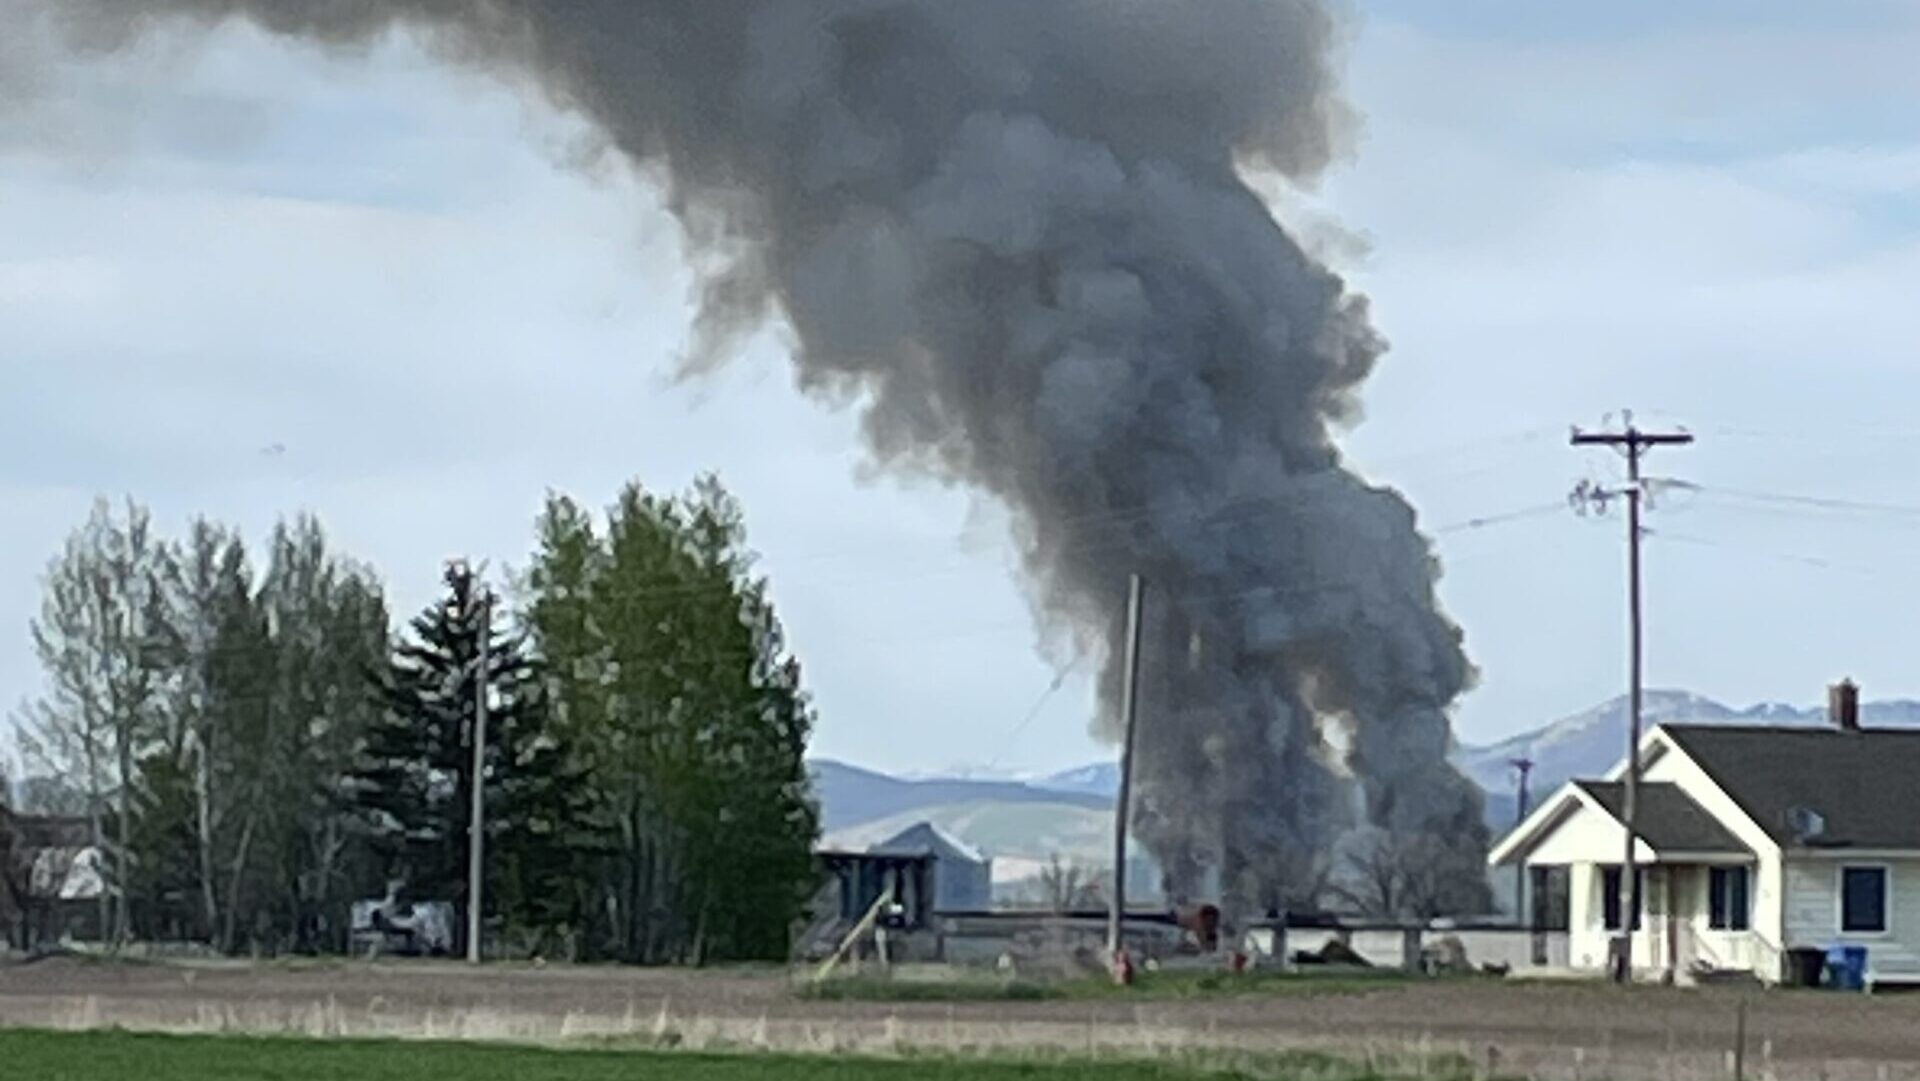 Agriculture officials said the fire most likely started after a piece of equipment malfunctioned at...